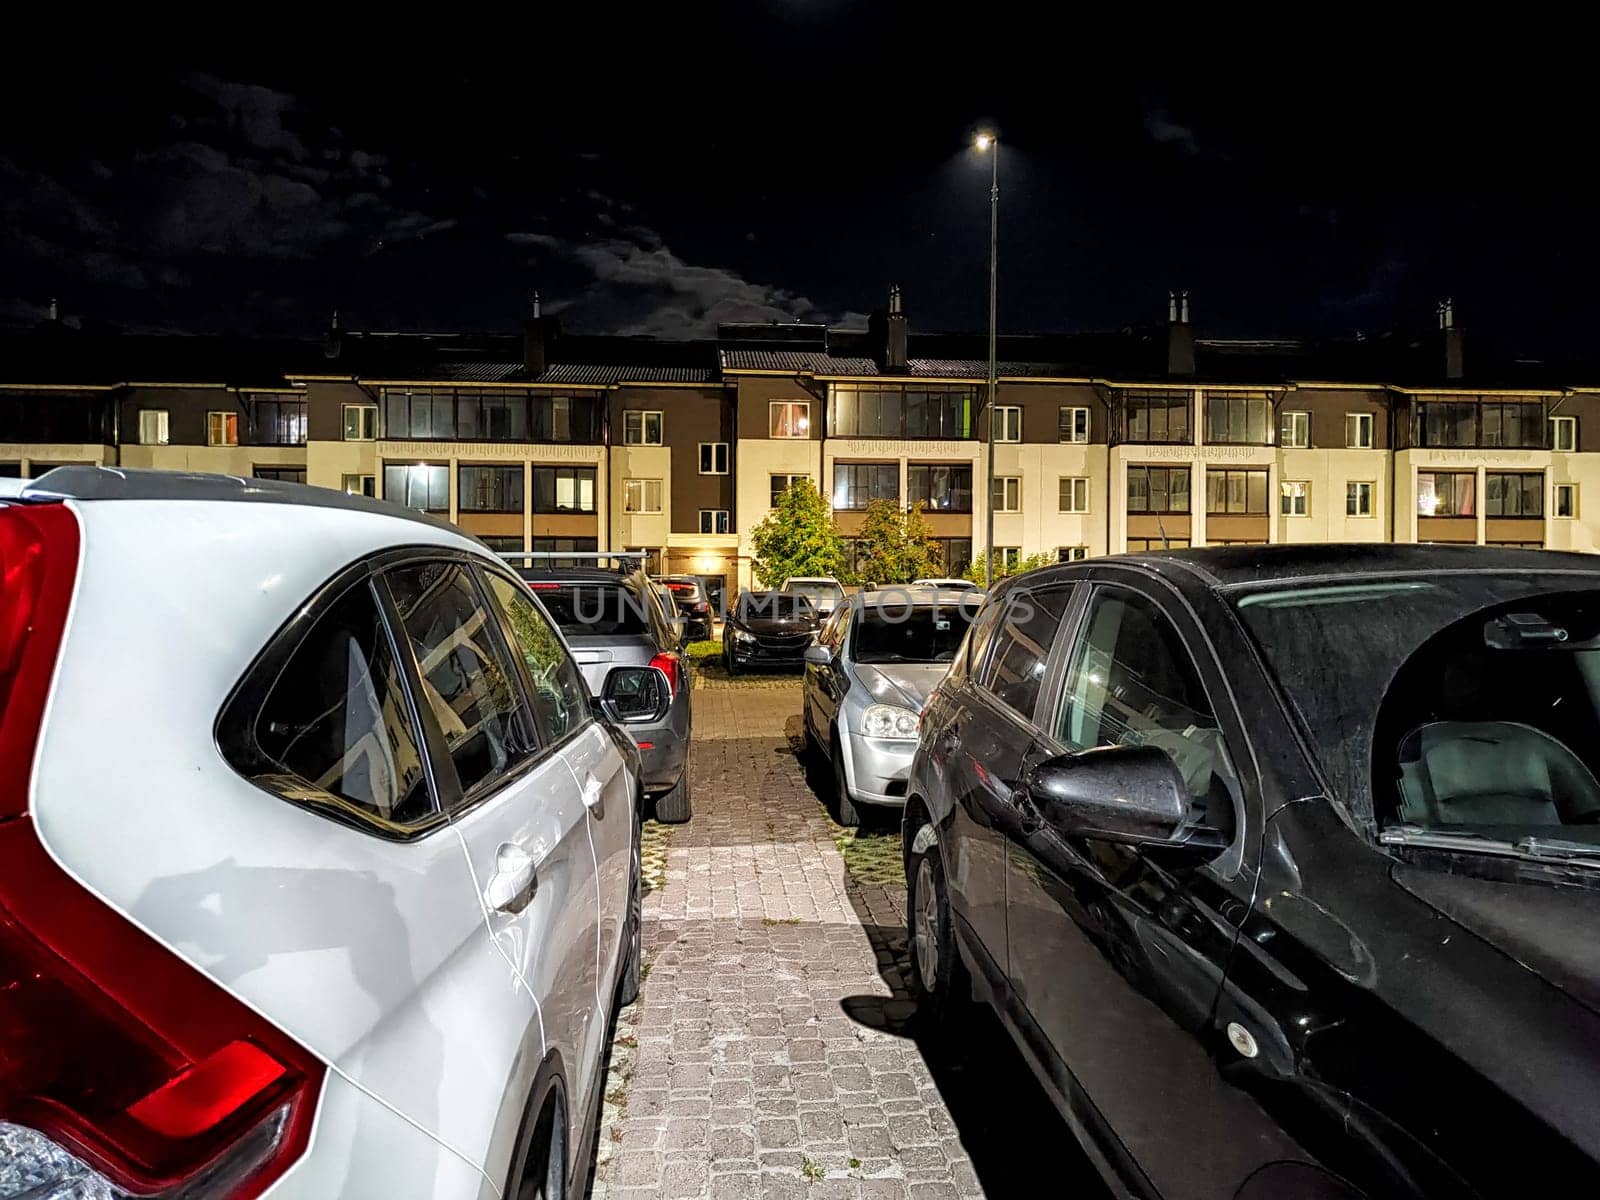 Nighttime View of a Residential Parking Lot With Cars by keleny